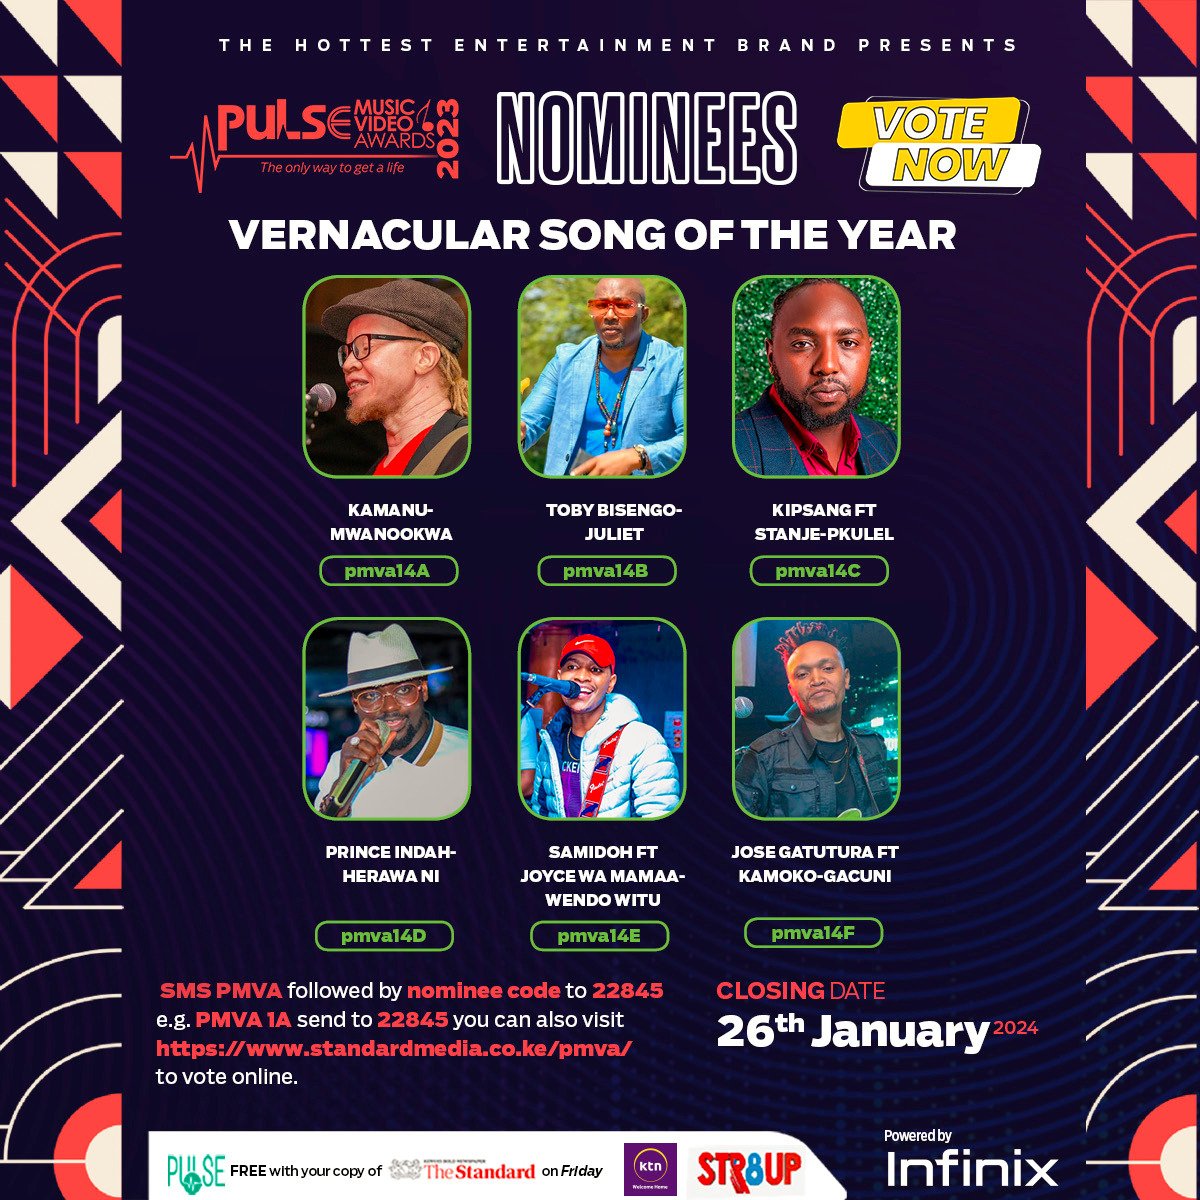 Last call for votes! This is your chance to decide the All Categories of the Year at Pulse Music Awards 2023. Hurry to standardmedia.co.ke/pmva/ and vote now. Presented by @InfinixKenya #PMVA2023